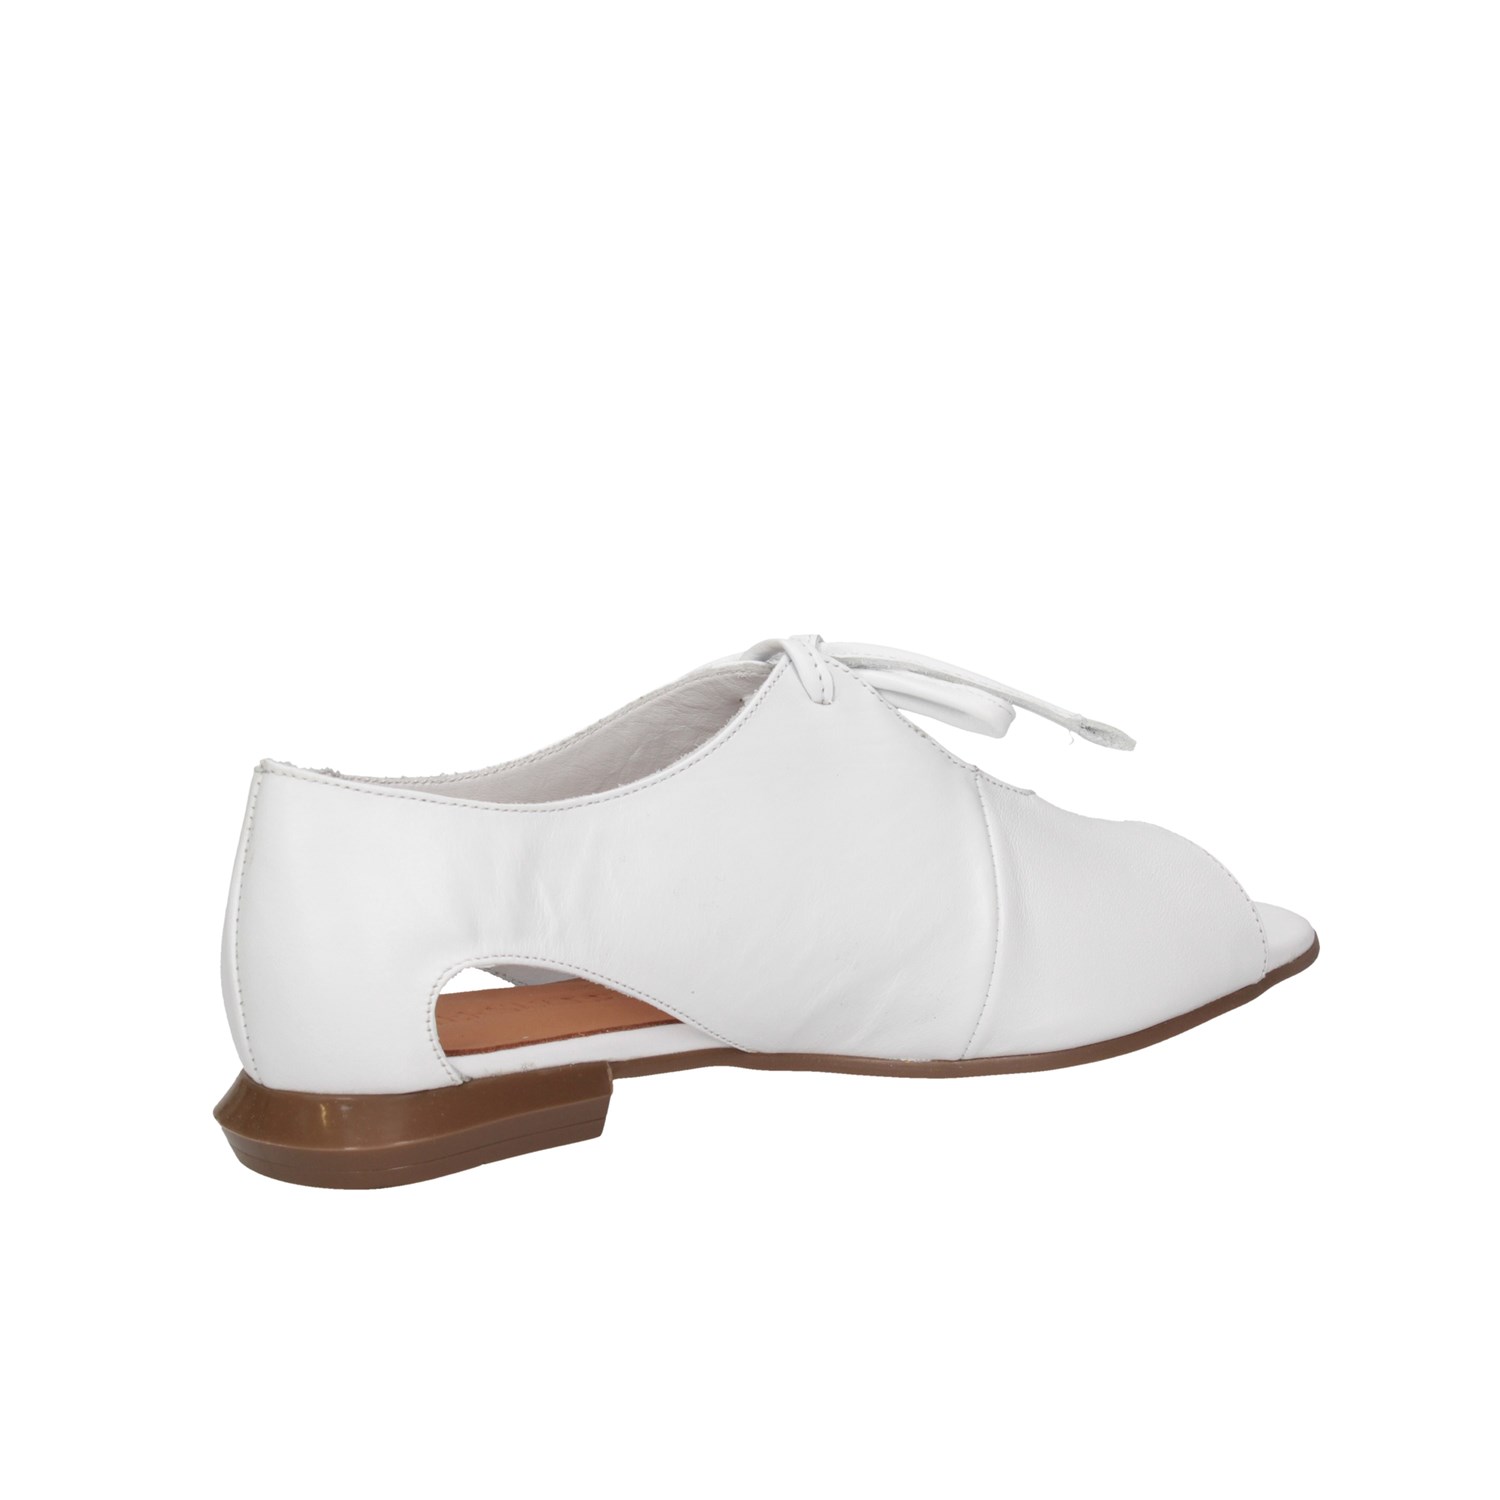 HERSUADE 265 White Shoes Woman 